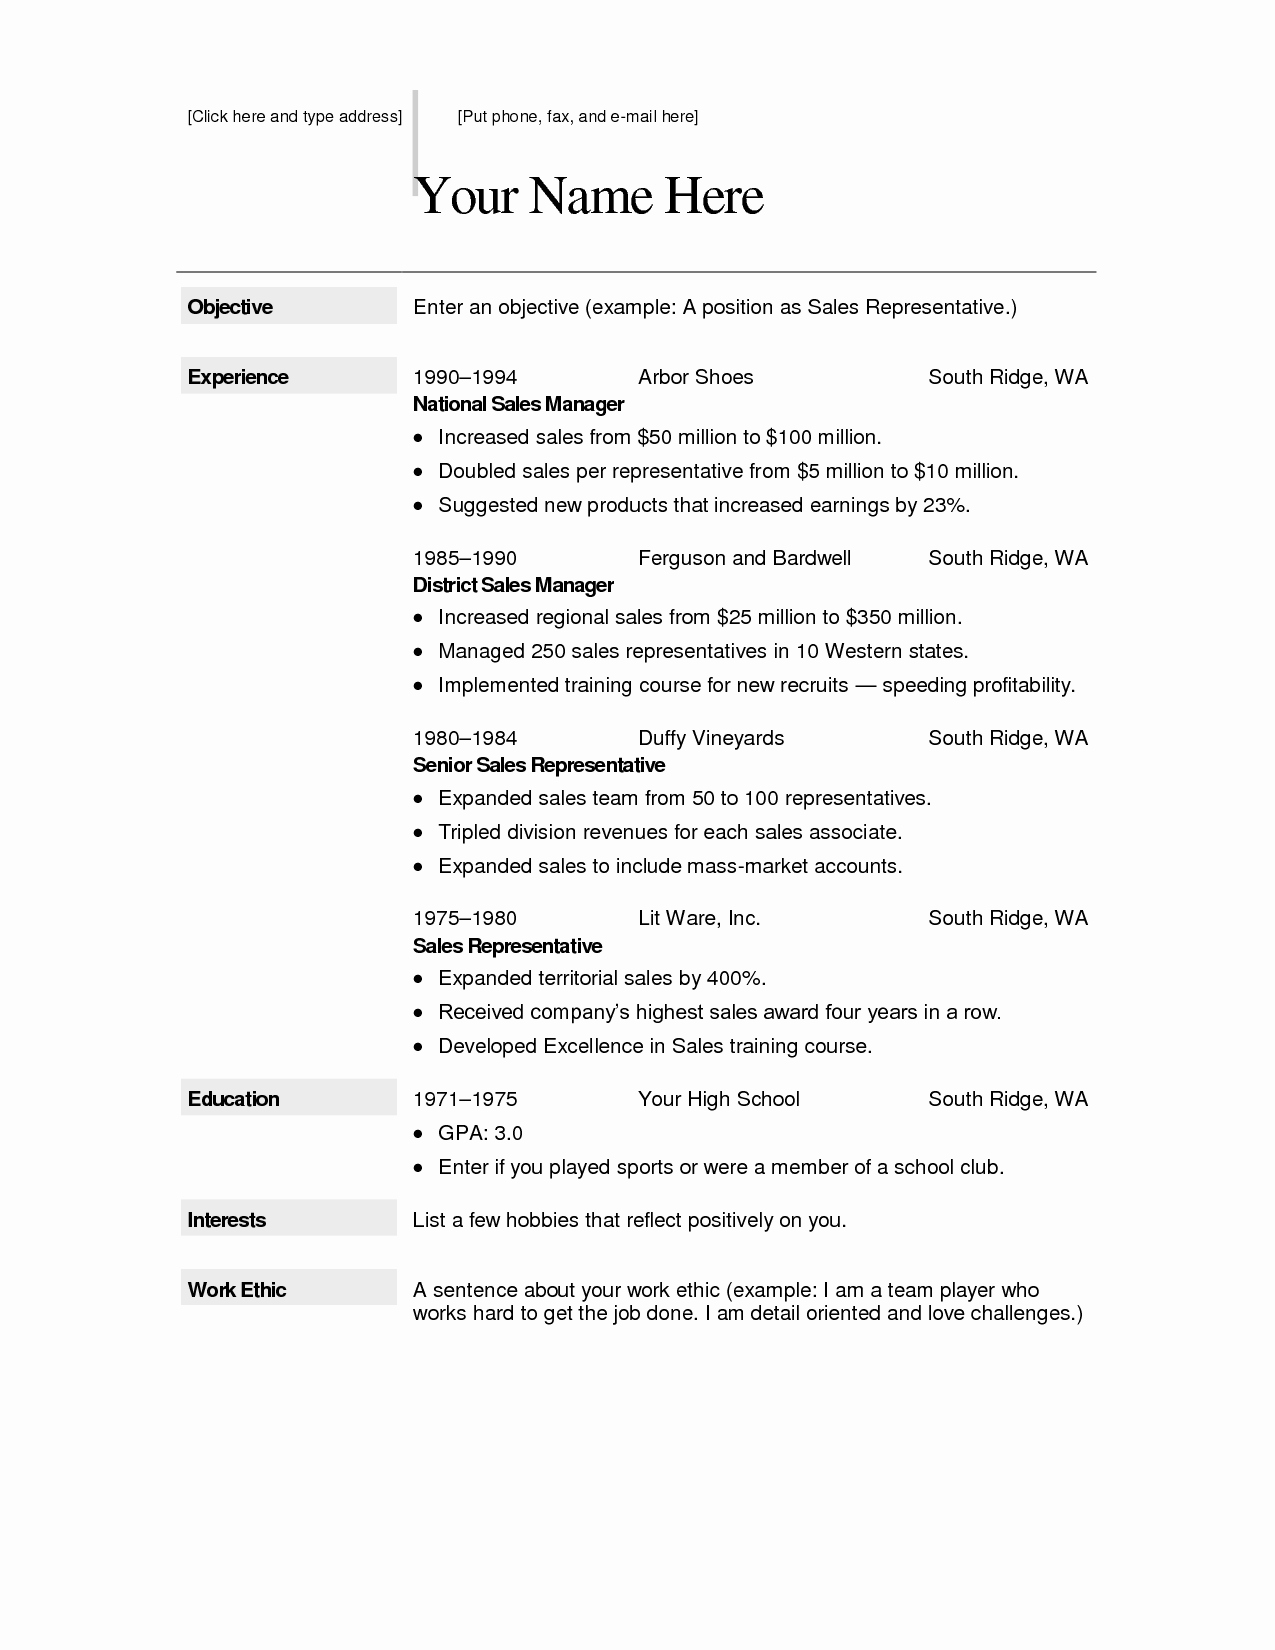 Free Resume Templates and Downloads Beautiful Free Resume formats Download